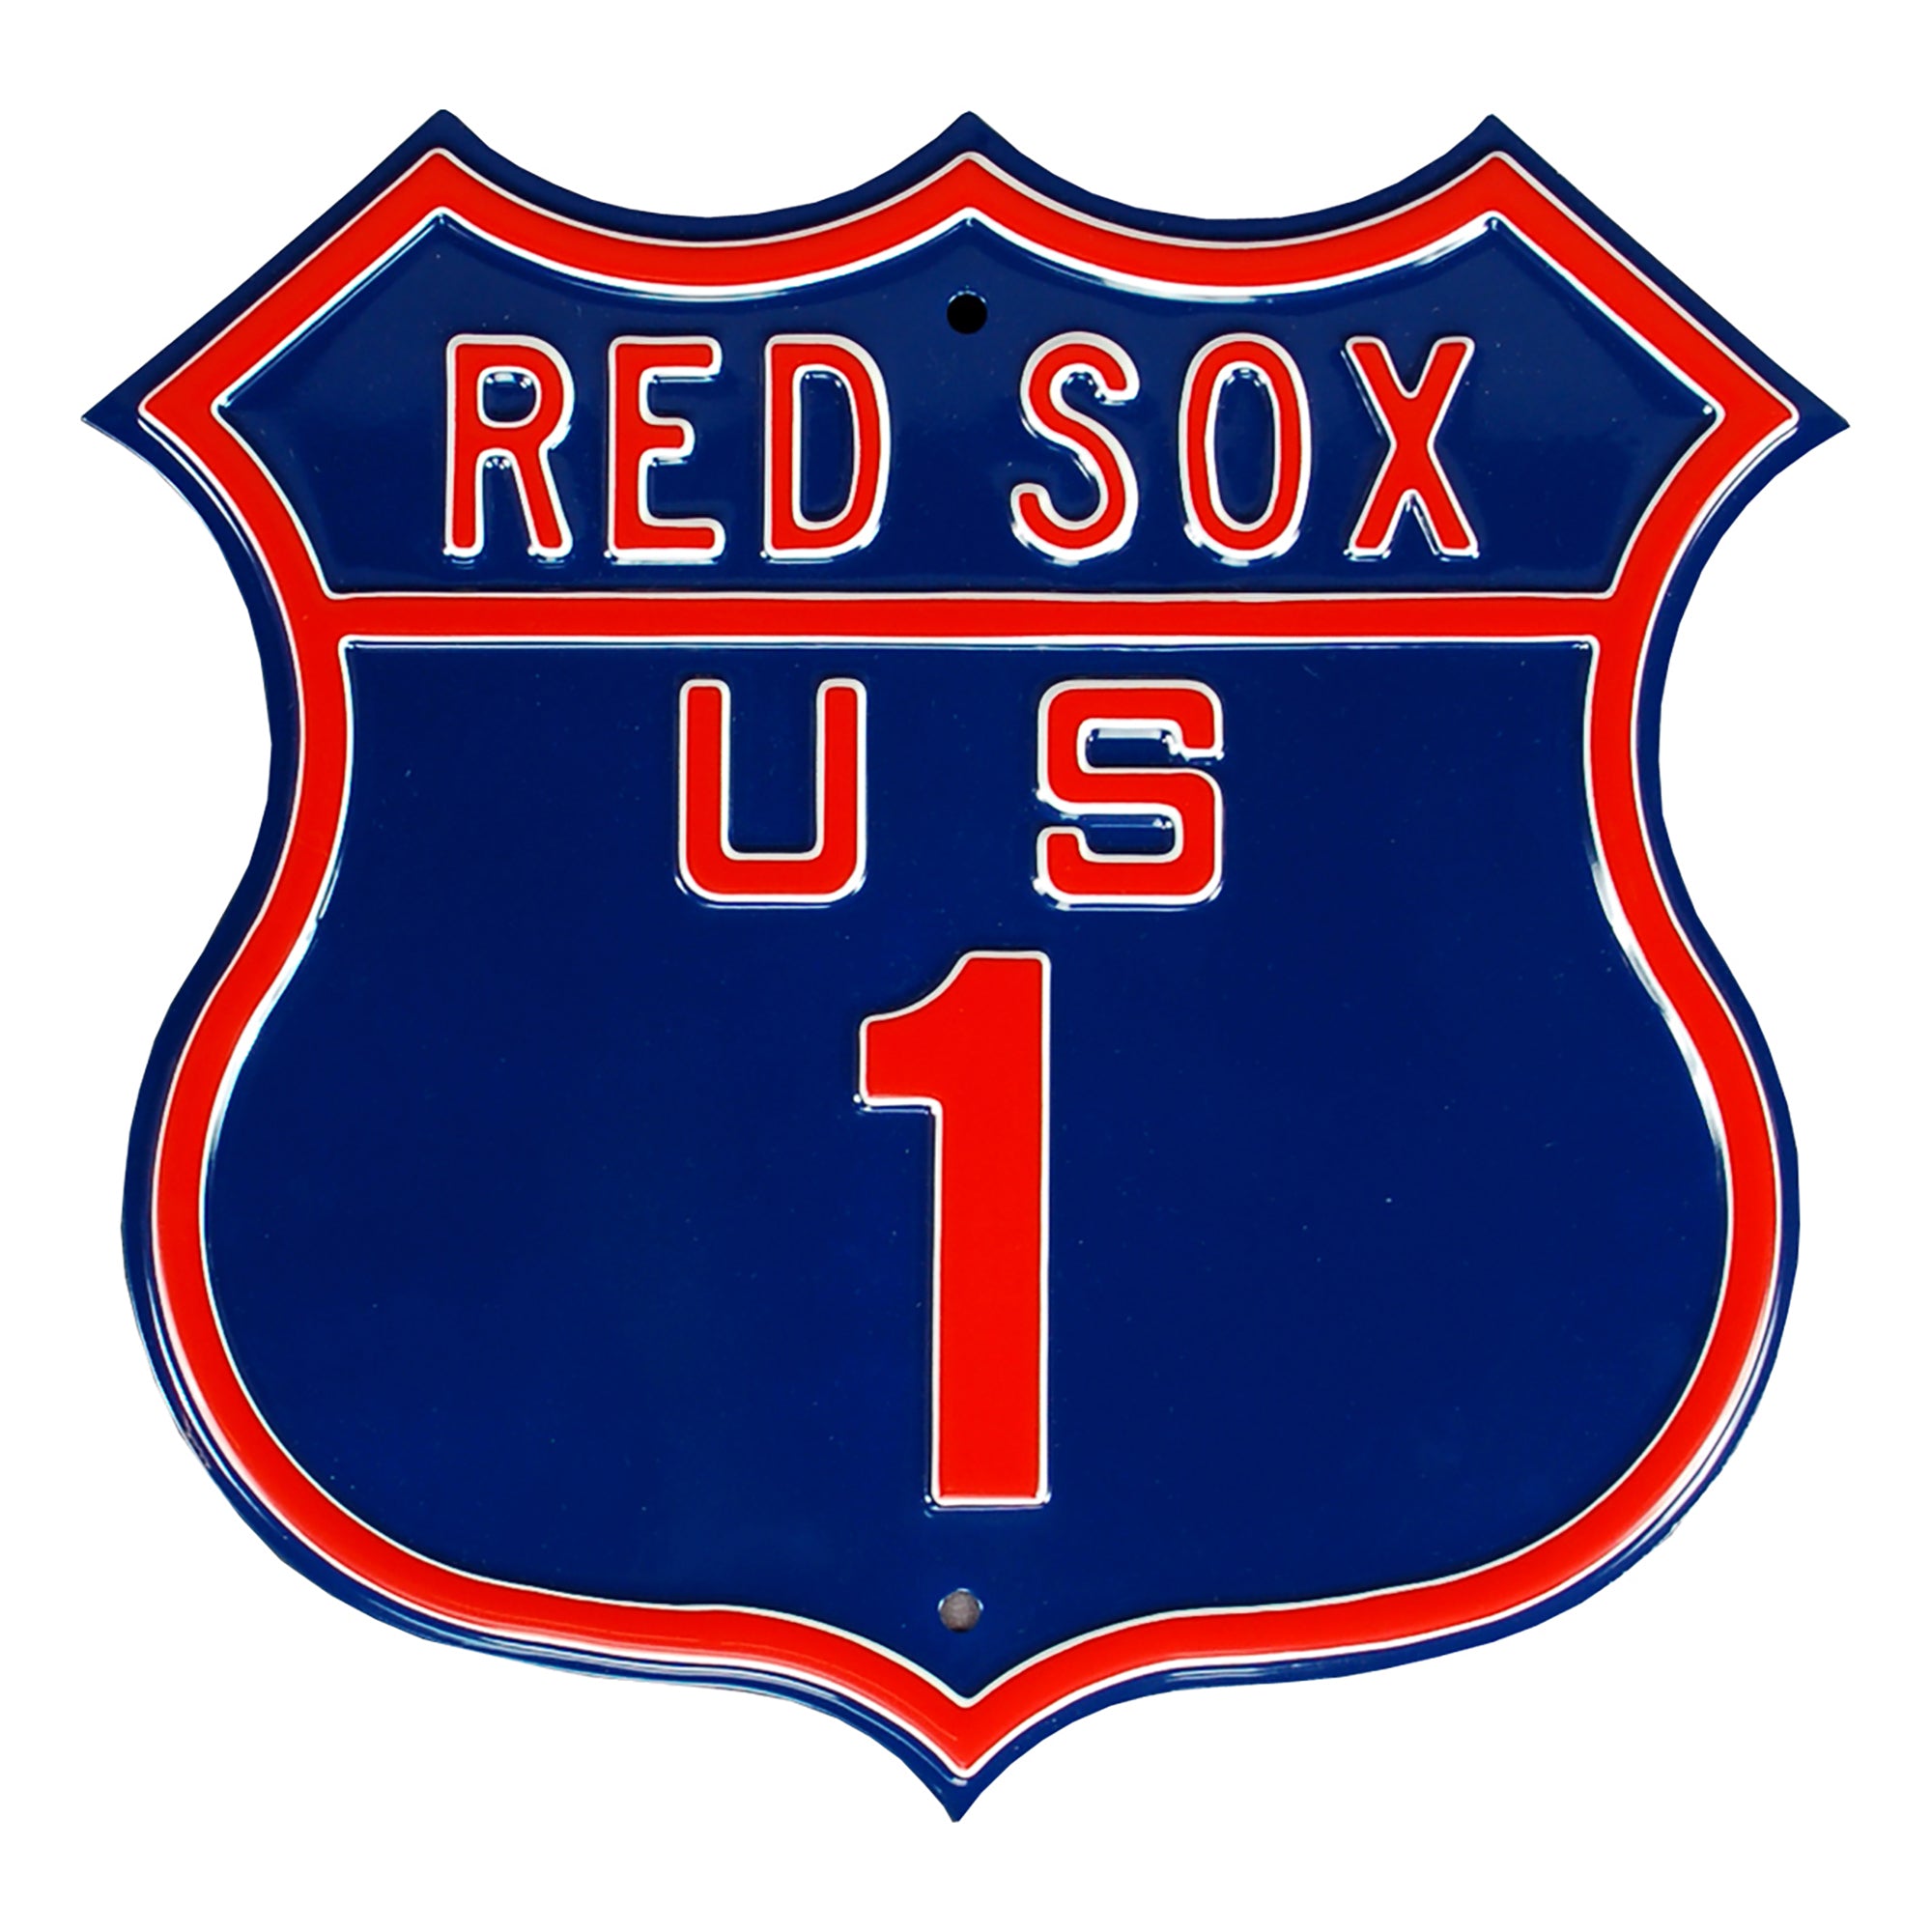 BOSTON RED SOX Sign Vintage style